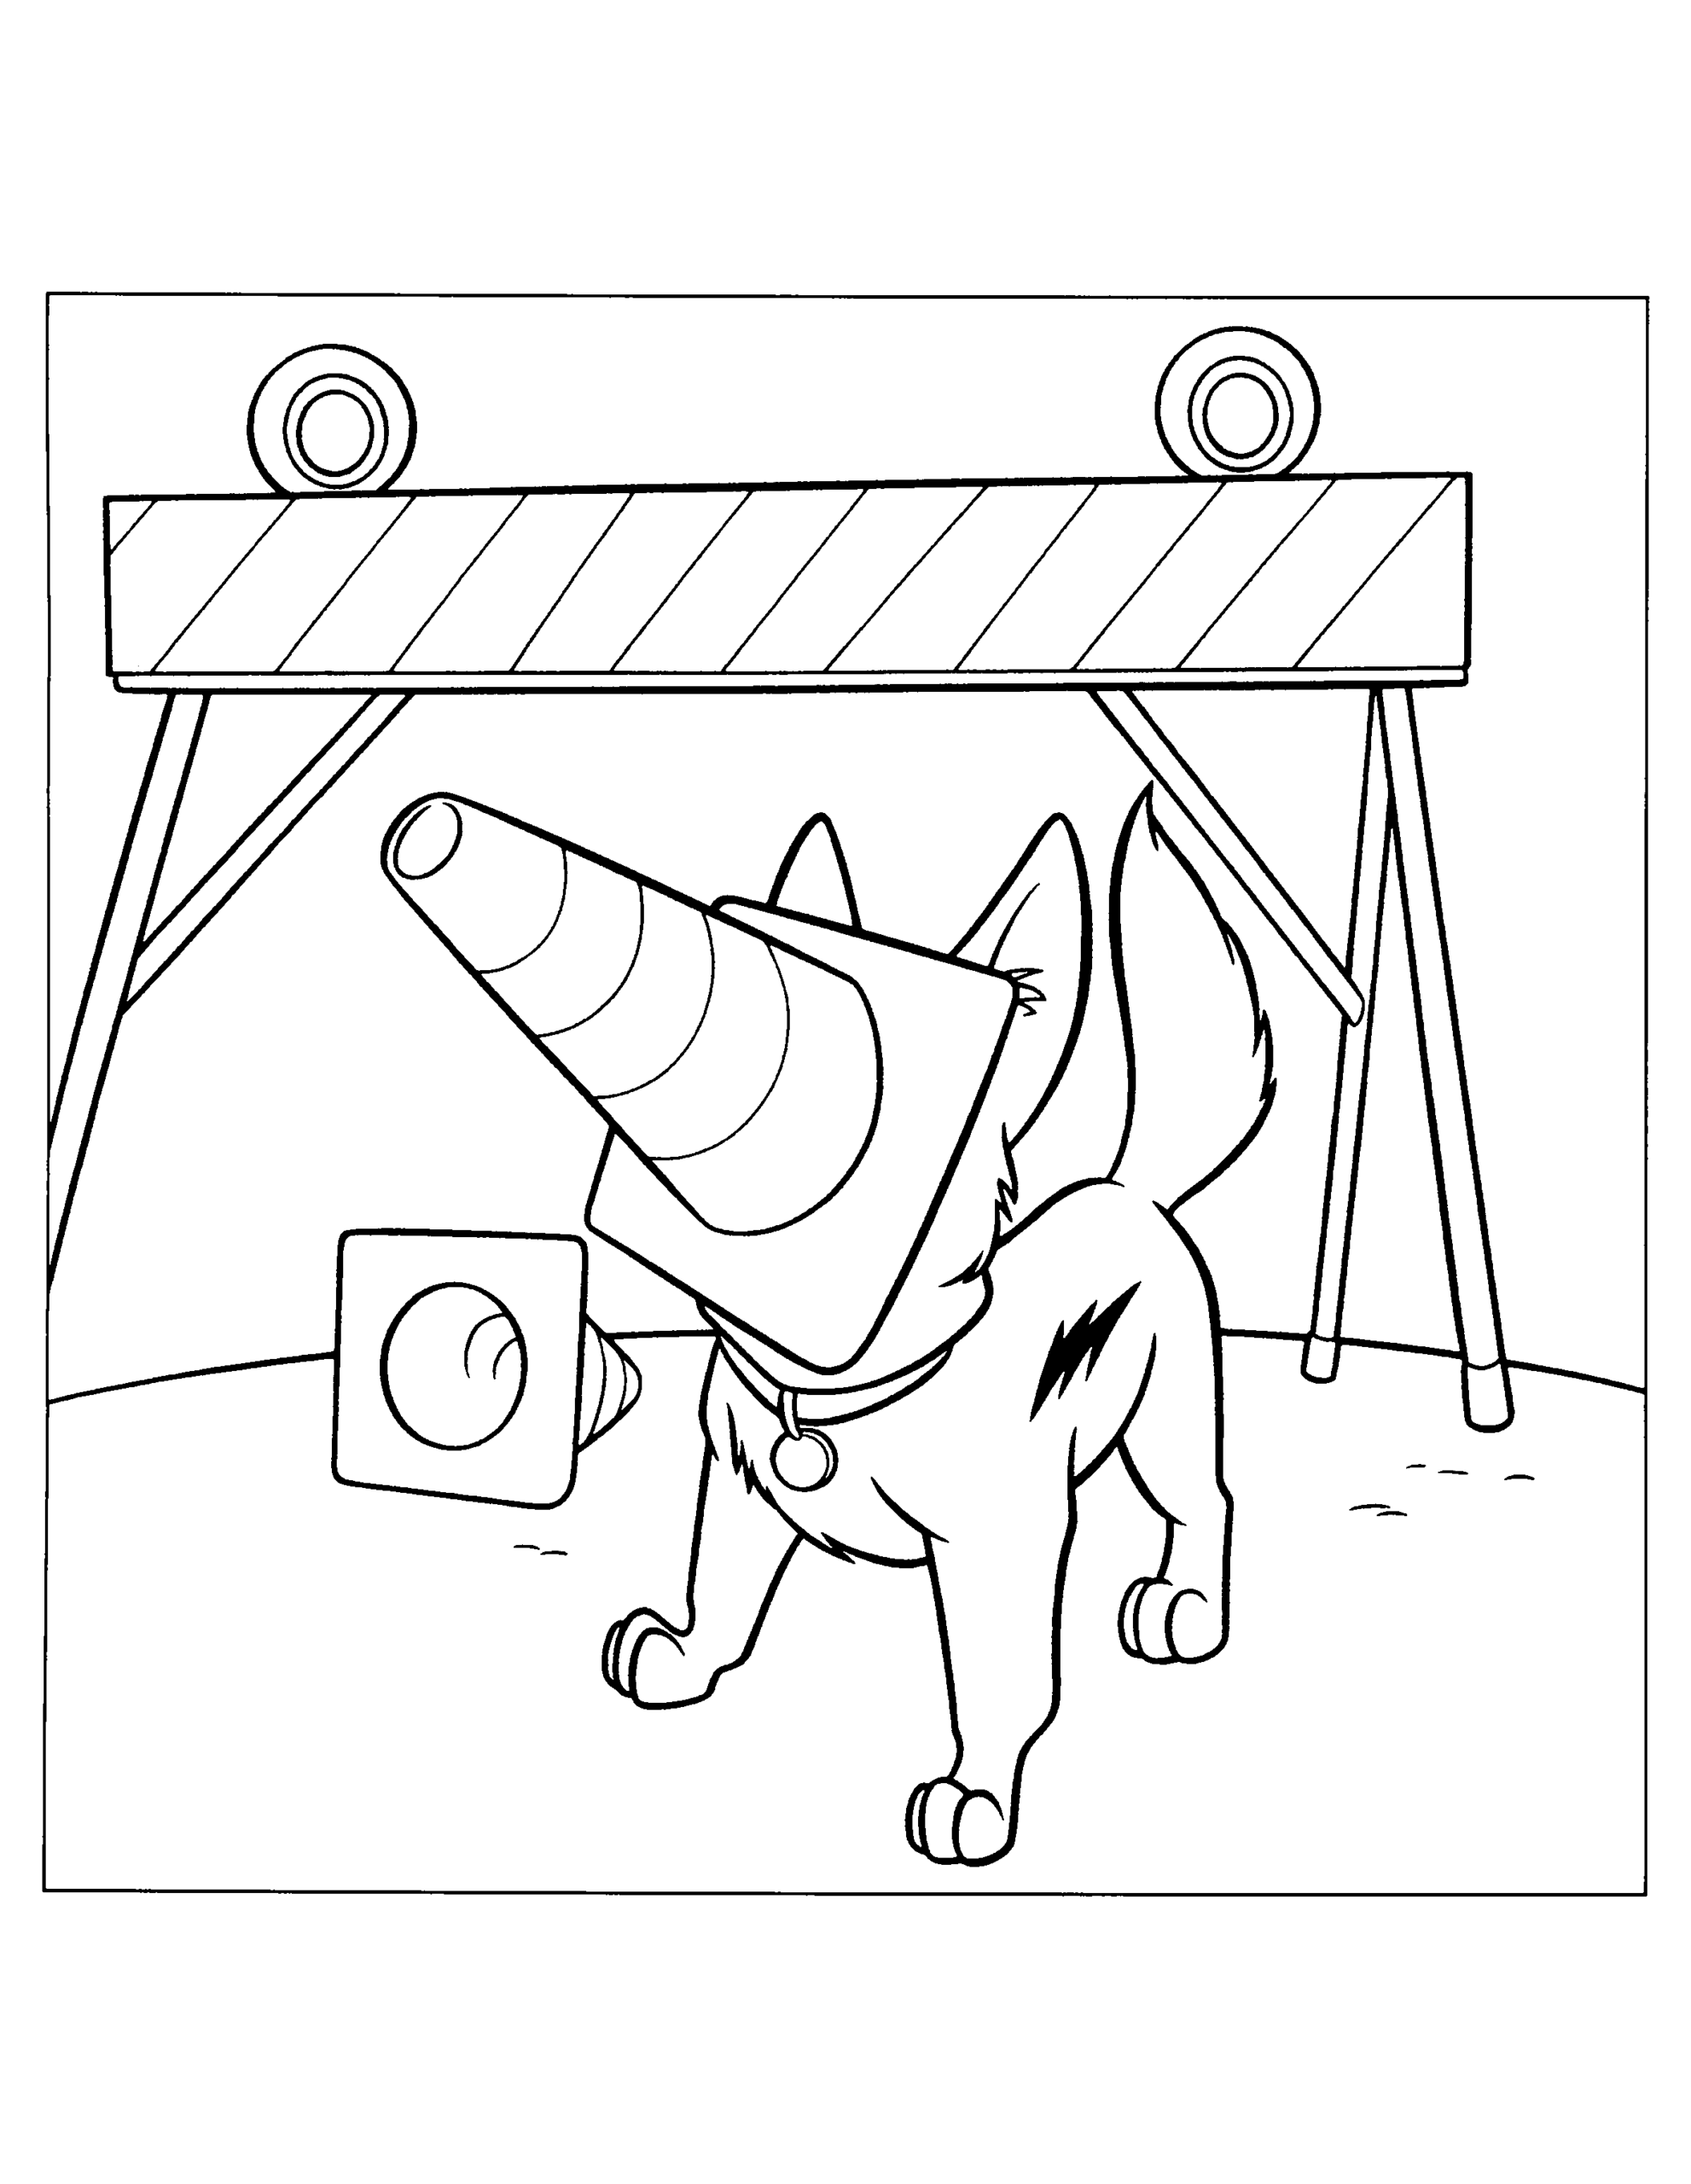 Bolt Coloring Pages TV Film bolt 6 Printable 2020 01224 Coloring4free